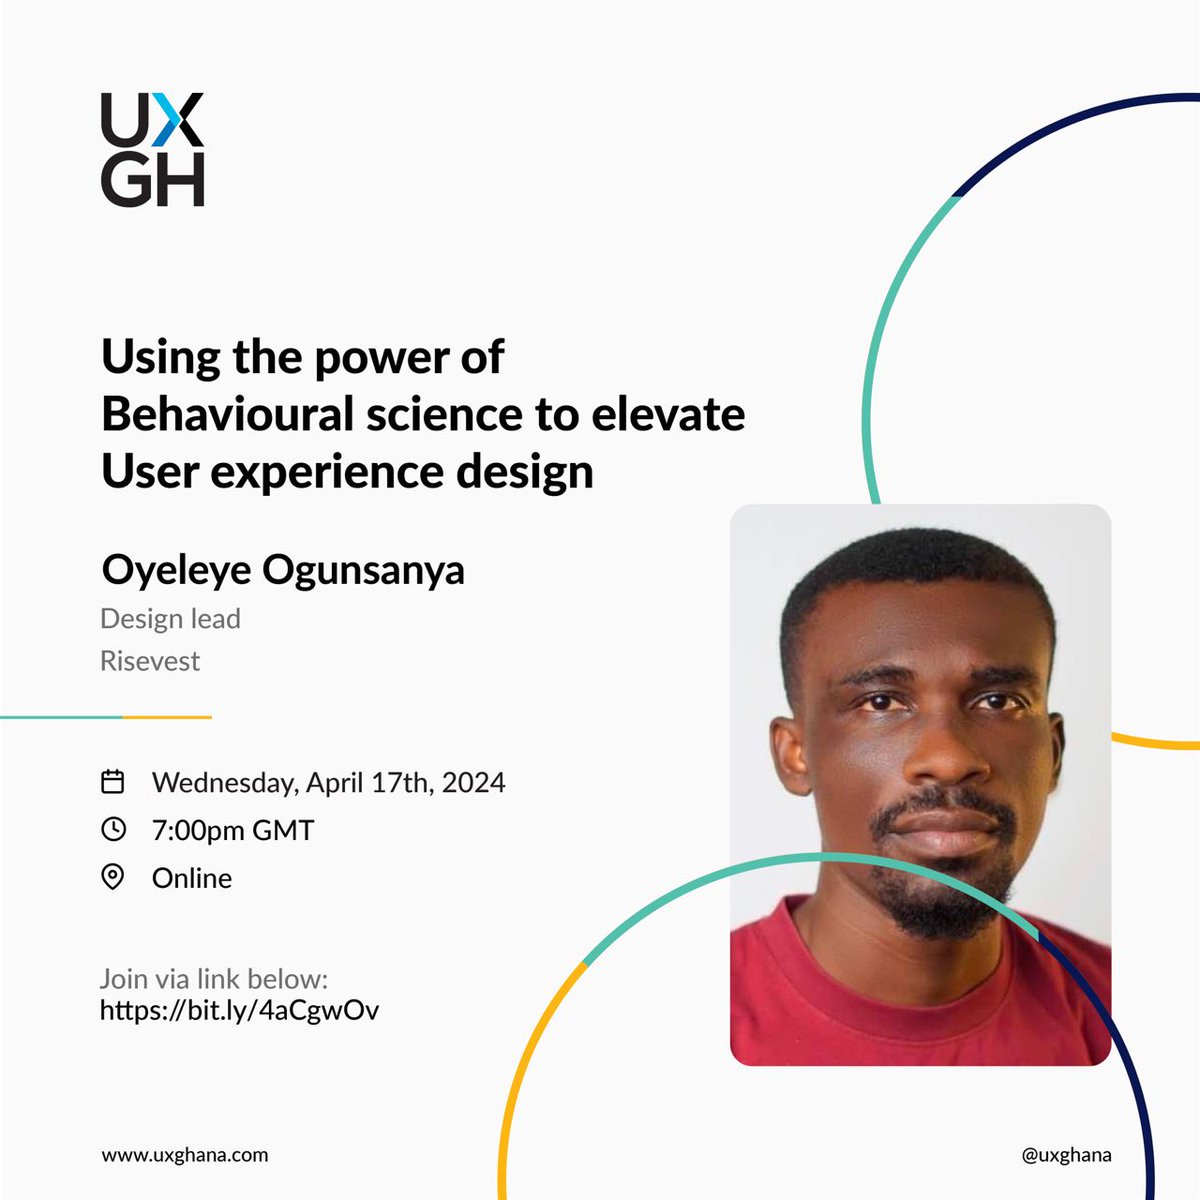 Mark on your calendar and join us via: bit.ly/4aCgwOv with @leyeconnect and discover how behavioral science can transform your UX design. Understand why your users are leaving your website frustrated? #UXDesign #behavioraldesign #webinar #uxghana